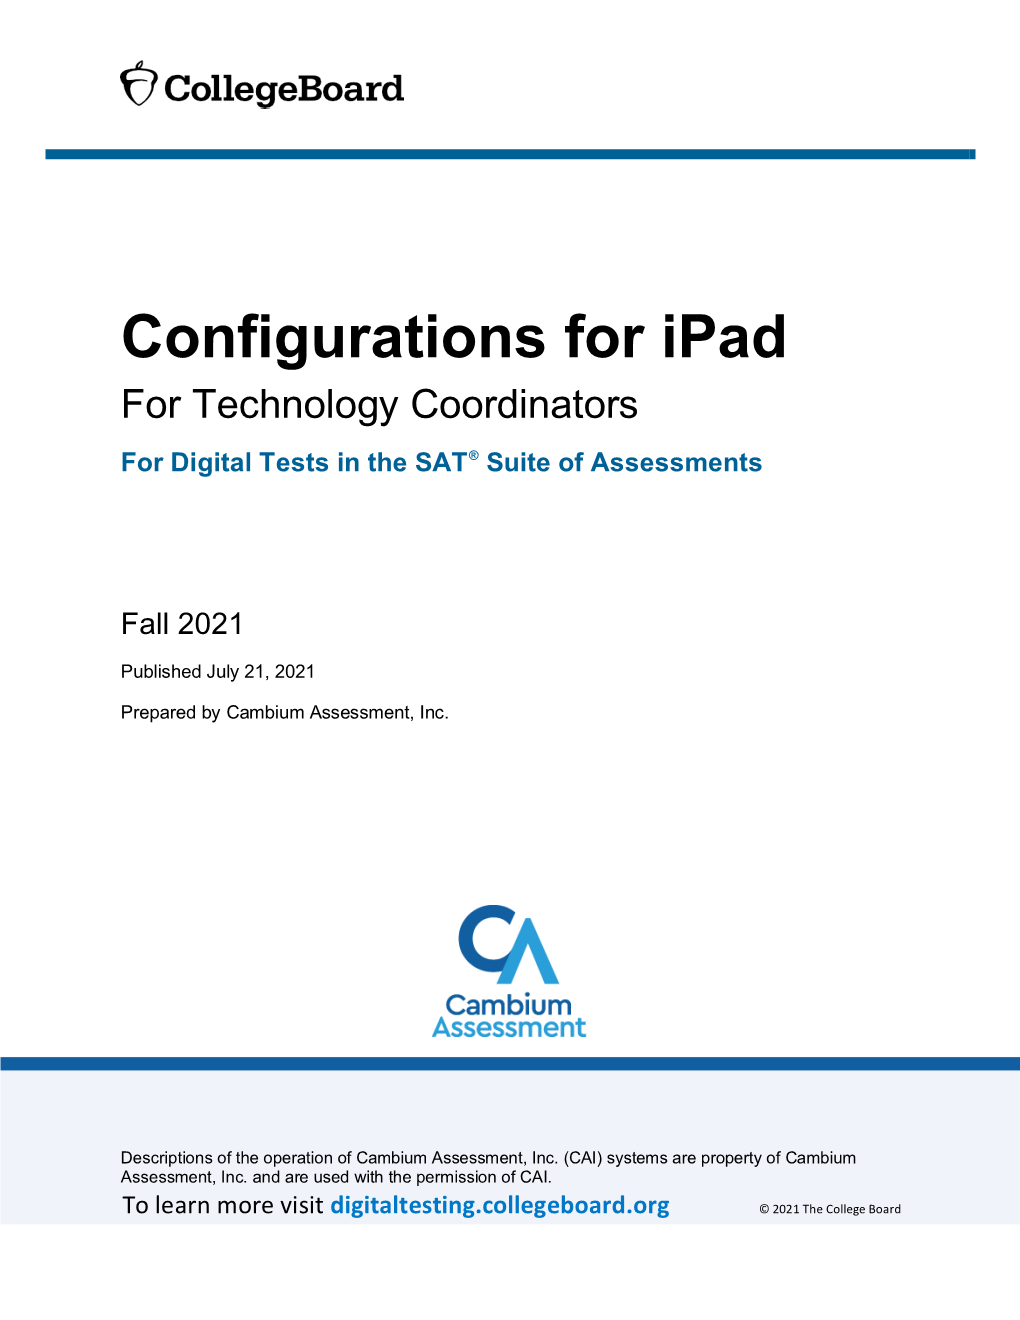 Configurations for Ipads Customerservice and Support